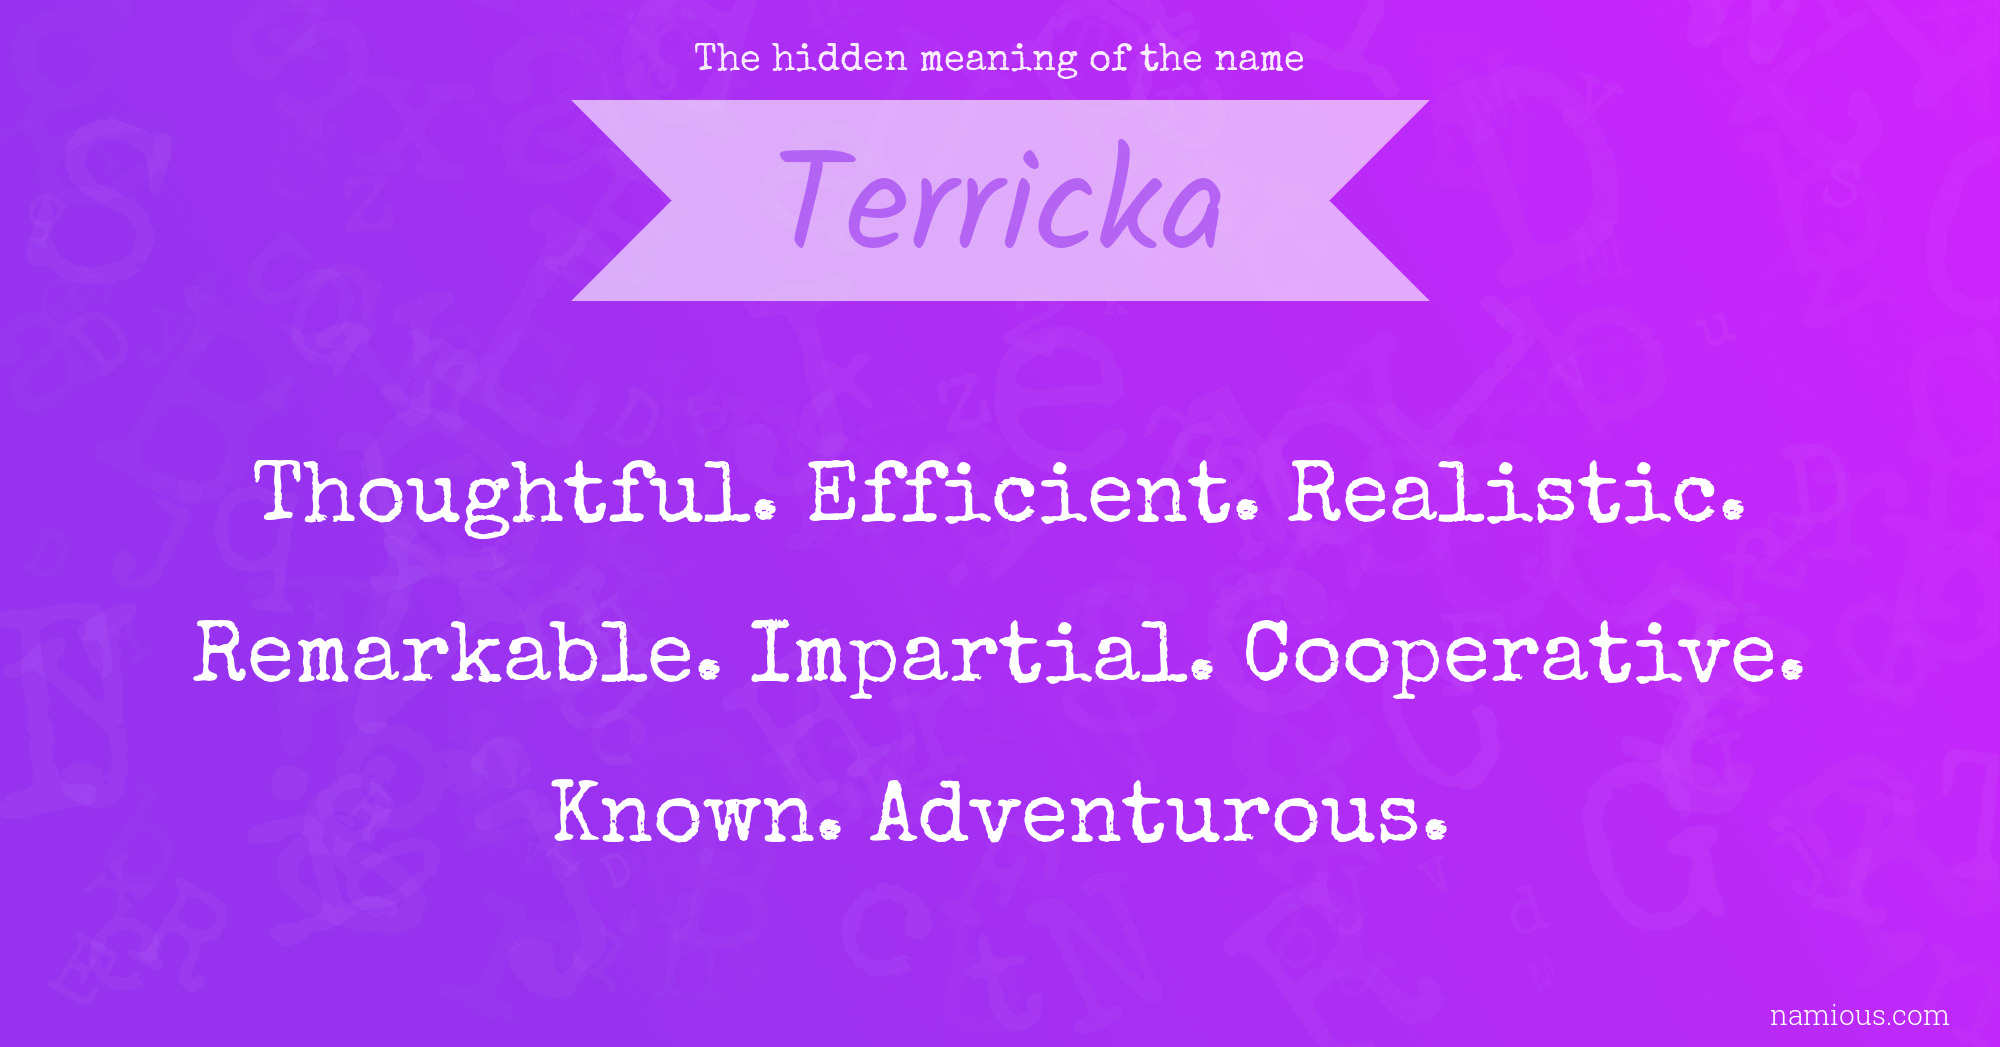 The hidden meaning of the name Terricka